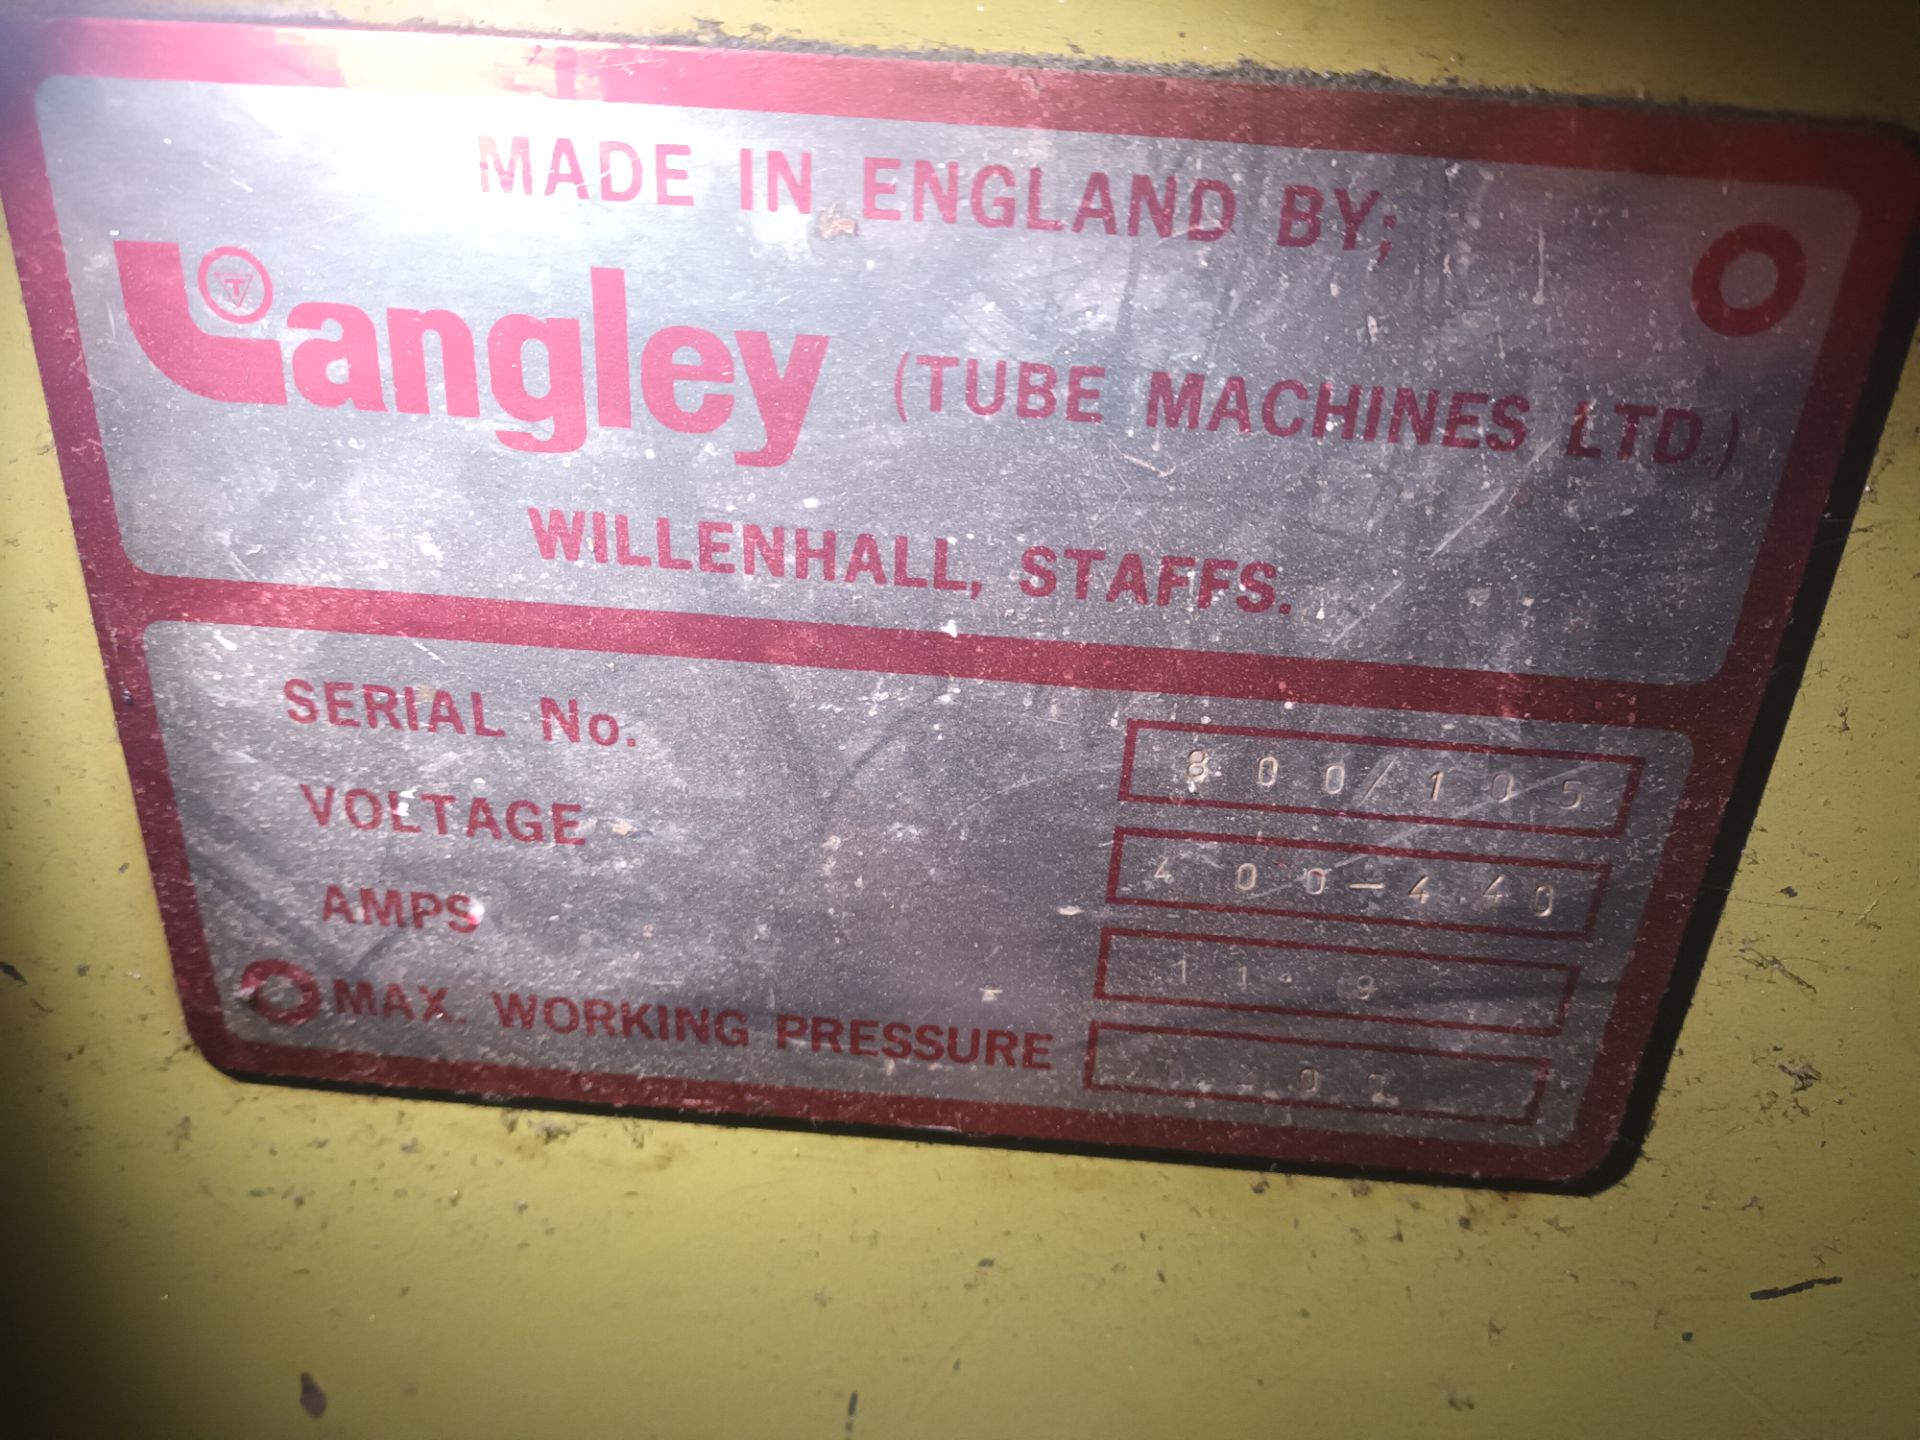 Langley tube machine s/n 800/105, 440v *A work Method Statement and Risk Assessment must be reviewed - Image 2 of 3